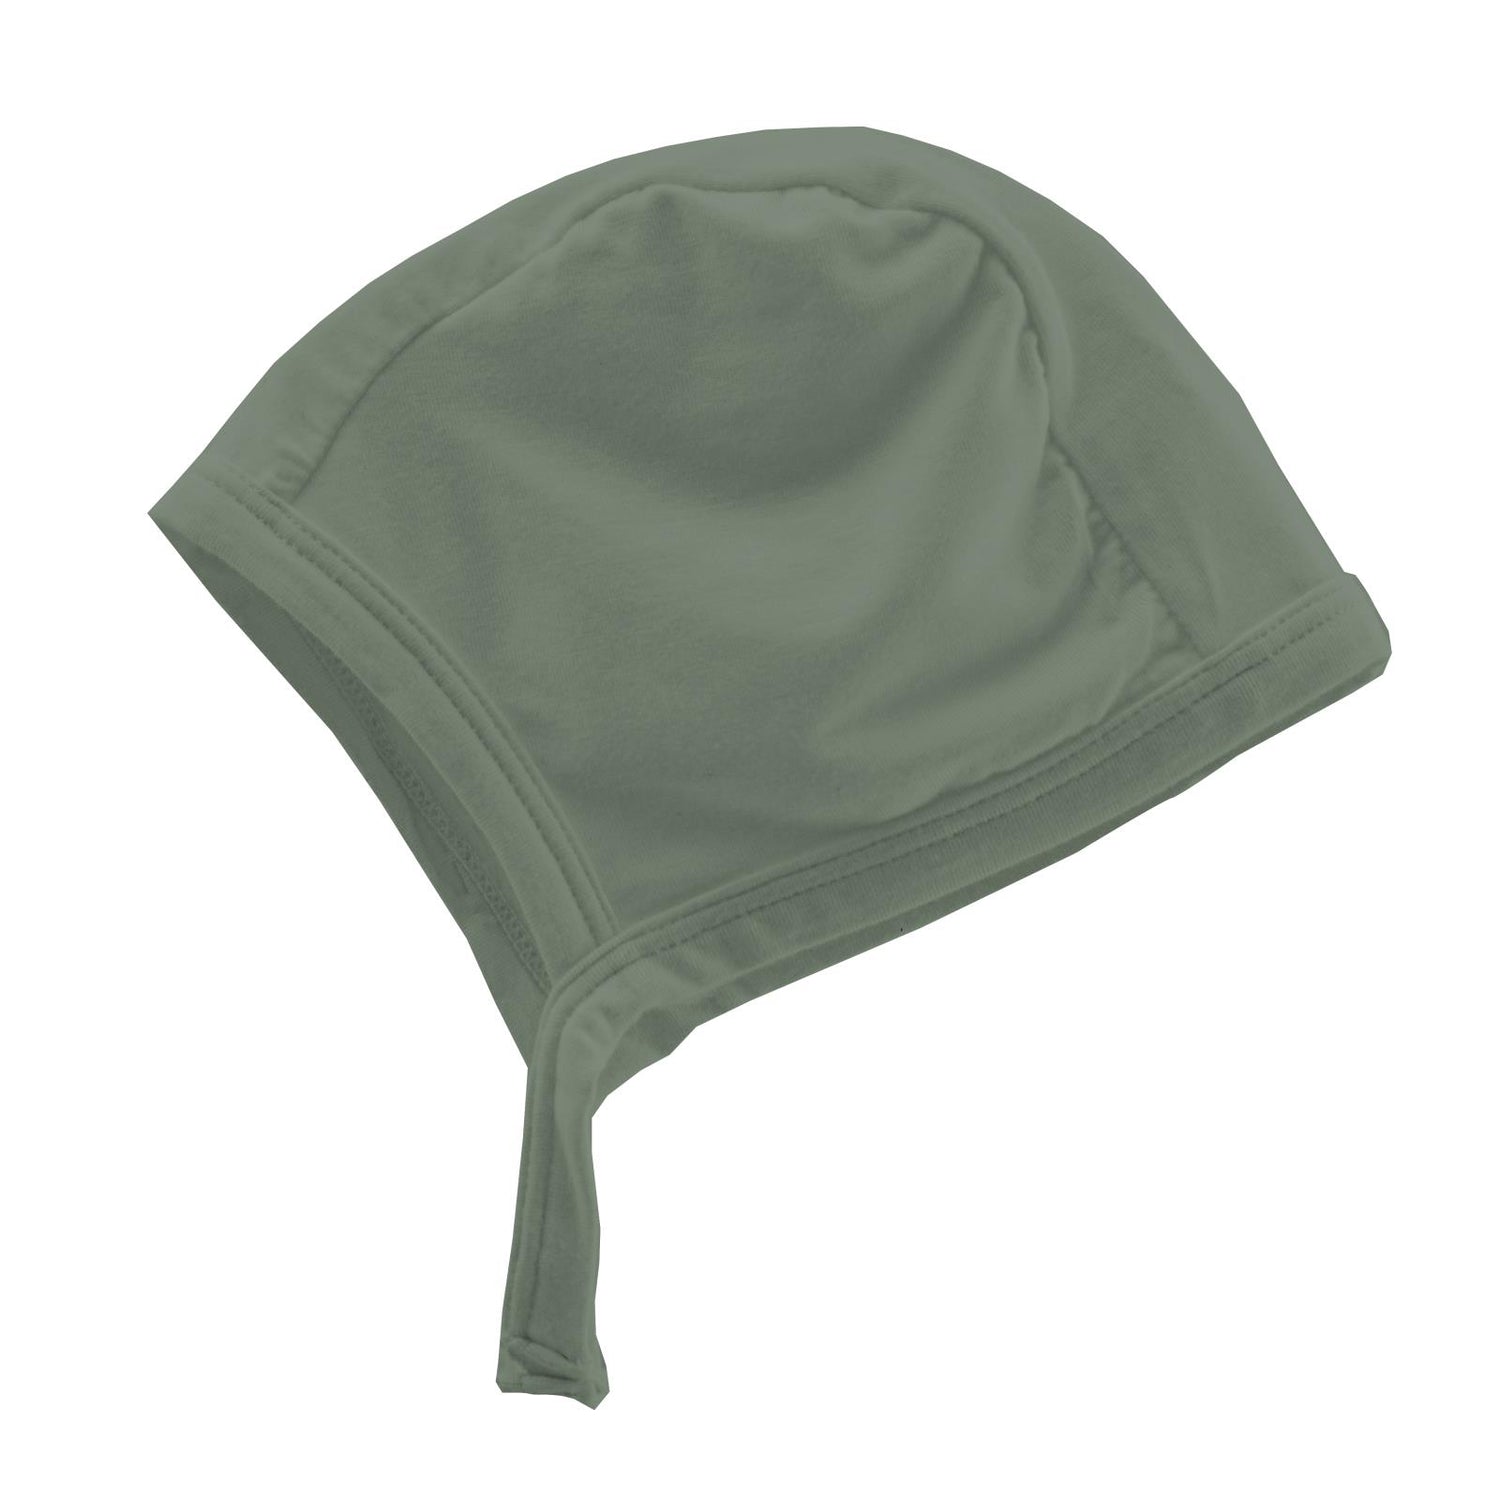 Aviator Hat in Lily Pad